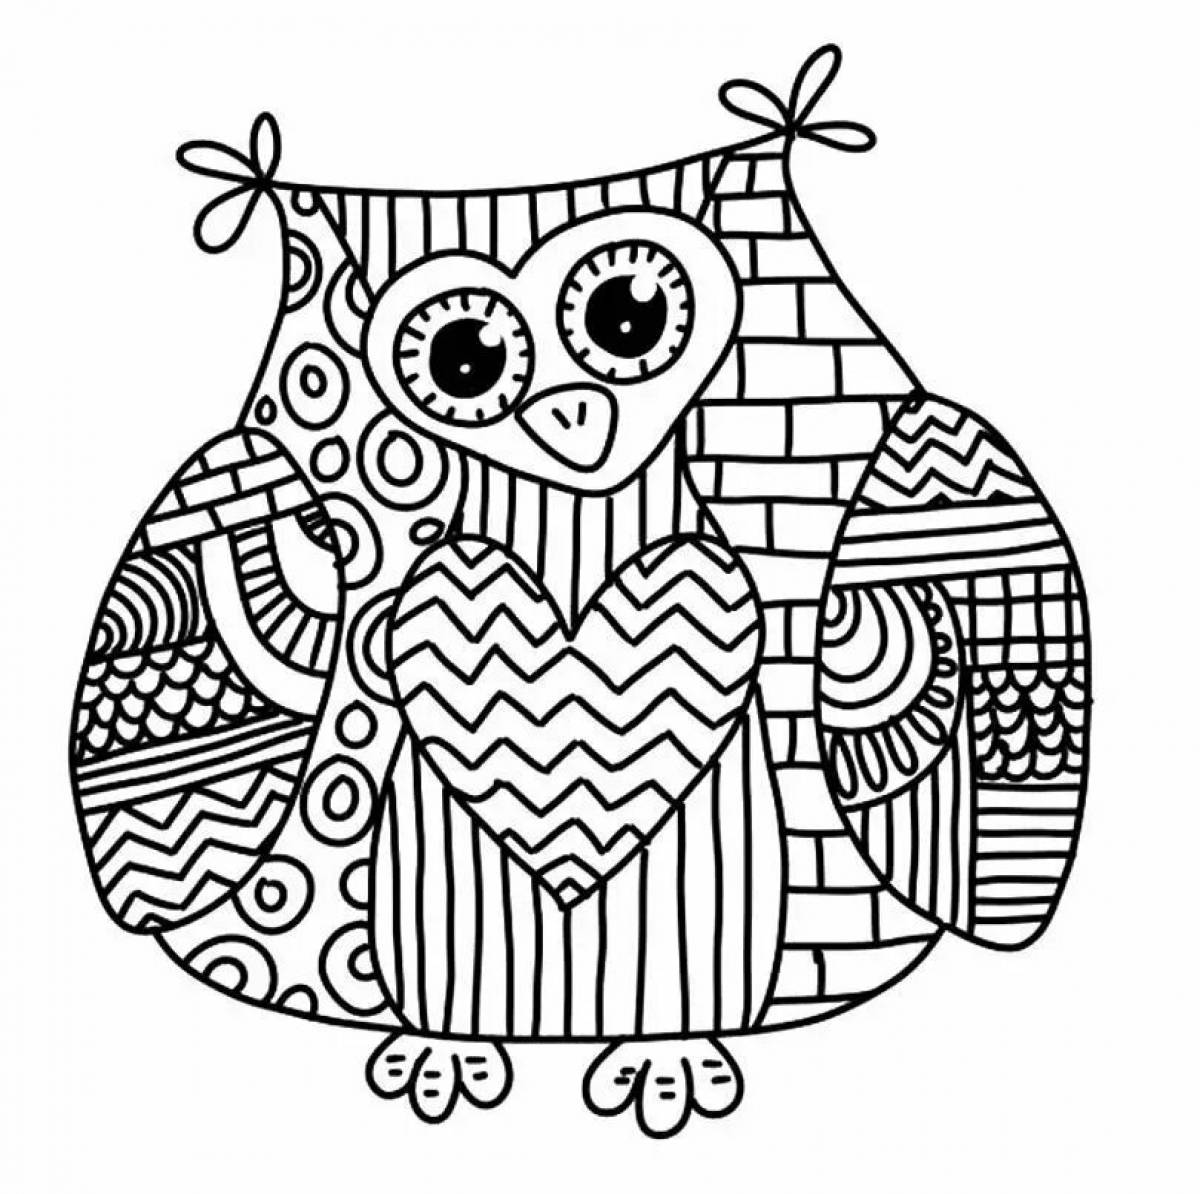 Dazzling anti-stress baby coloring book